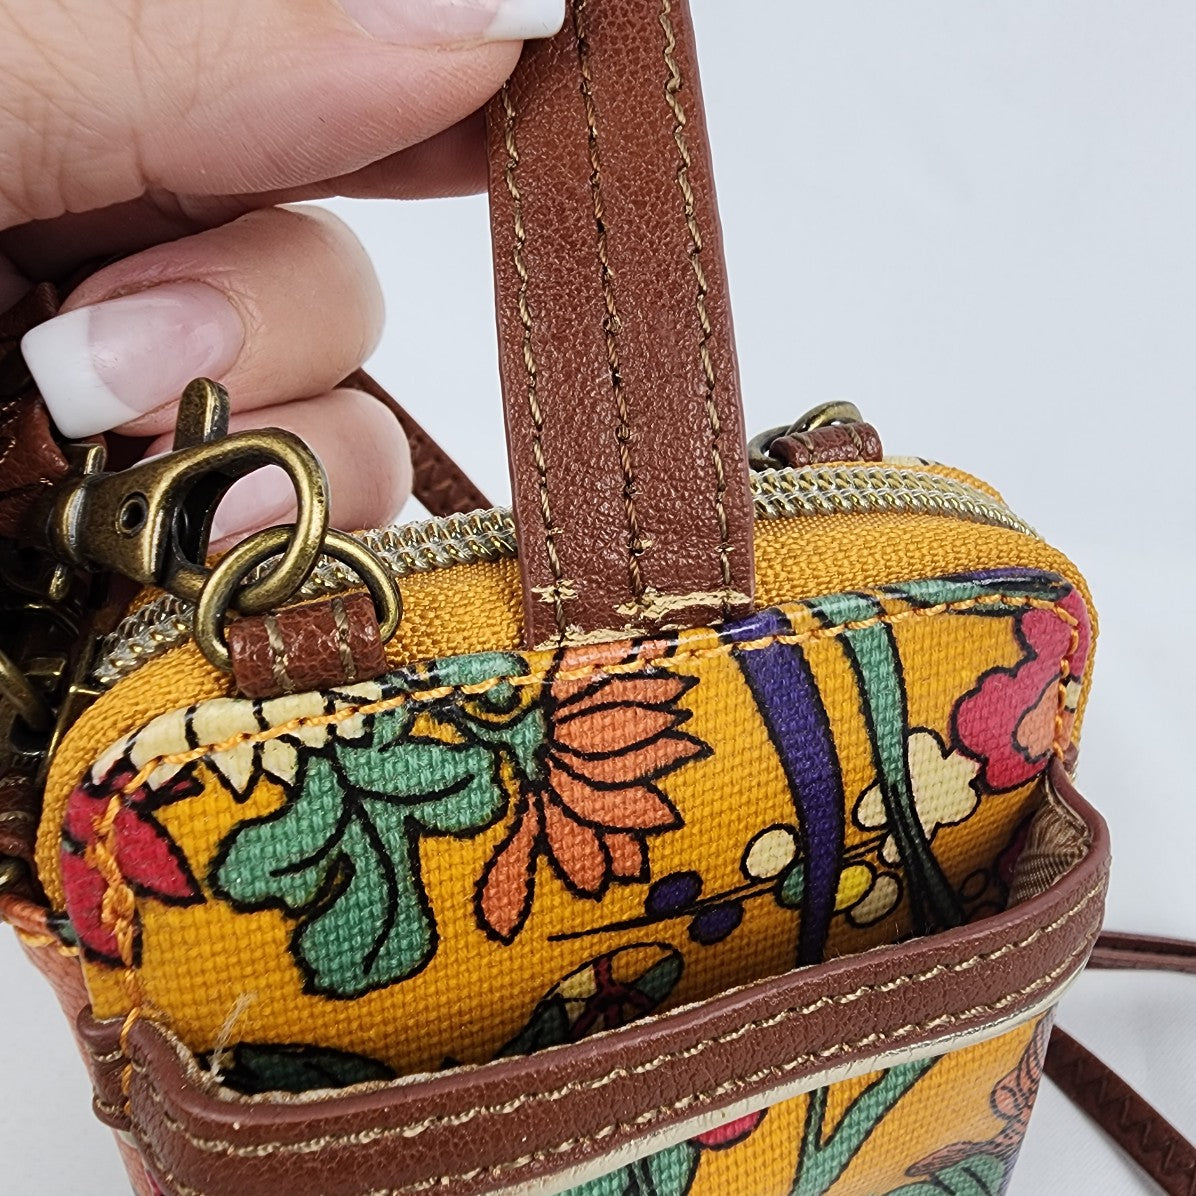 Sak Roots Yellow Floral Cell Phone Wallet Crossbody Purse